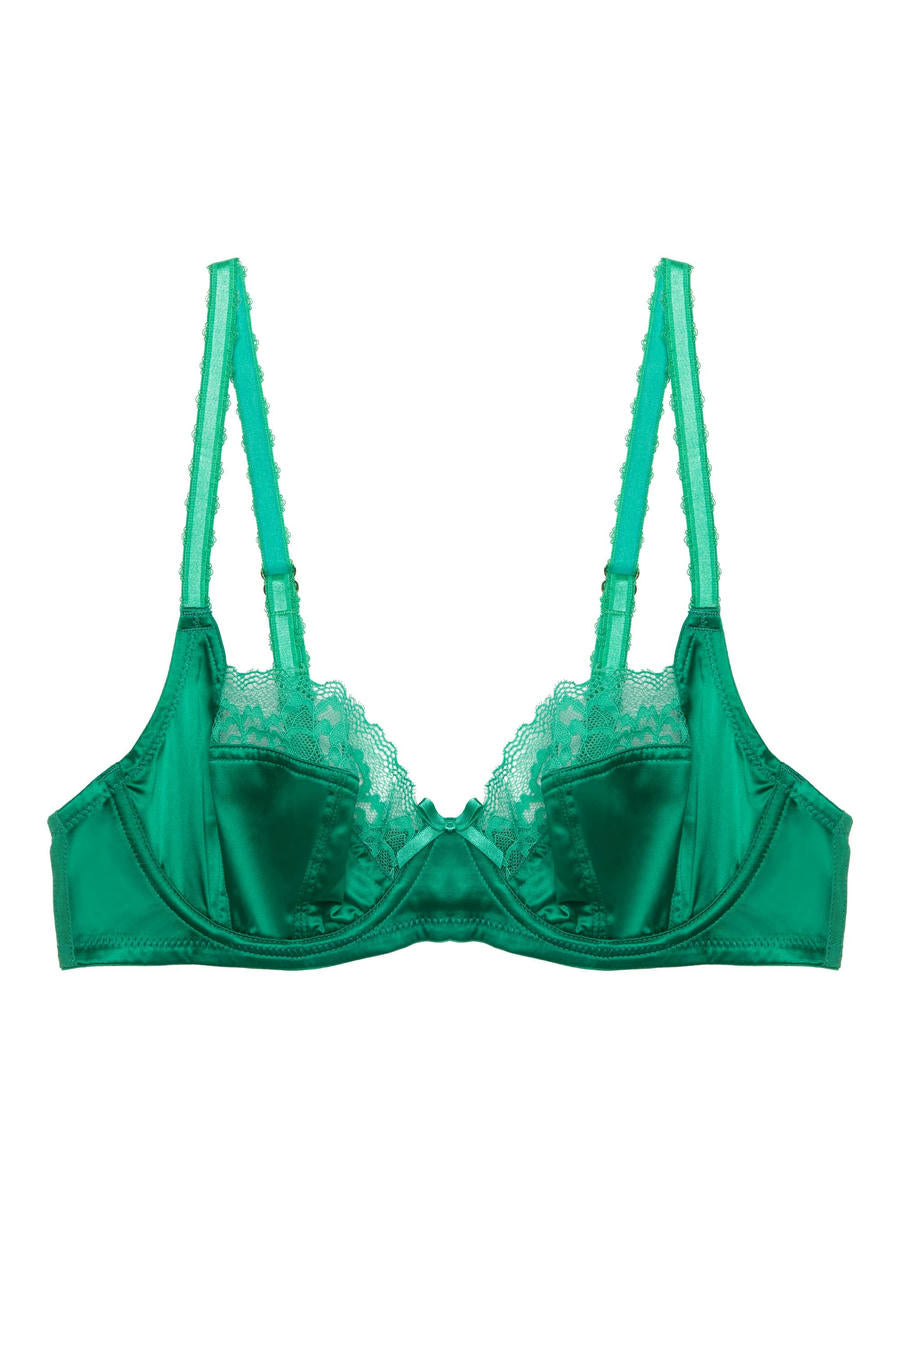 Rosalyn Emerald Satin Lace Bra - 30-40 bands and D-G cups (UK size)